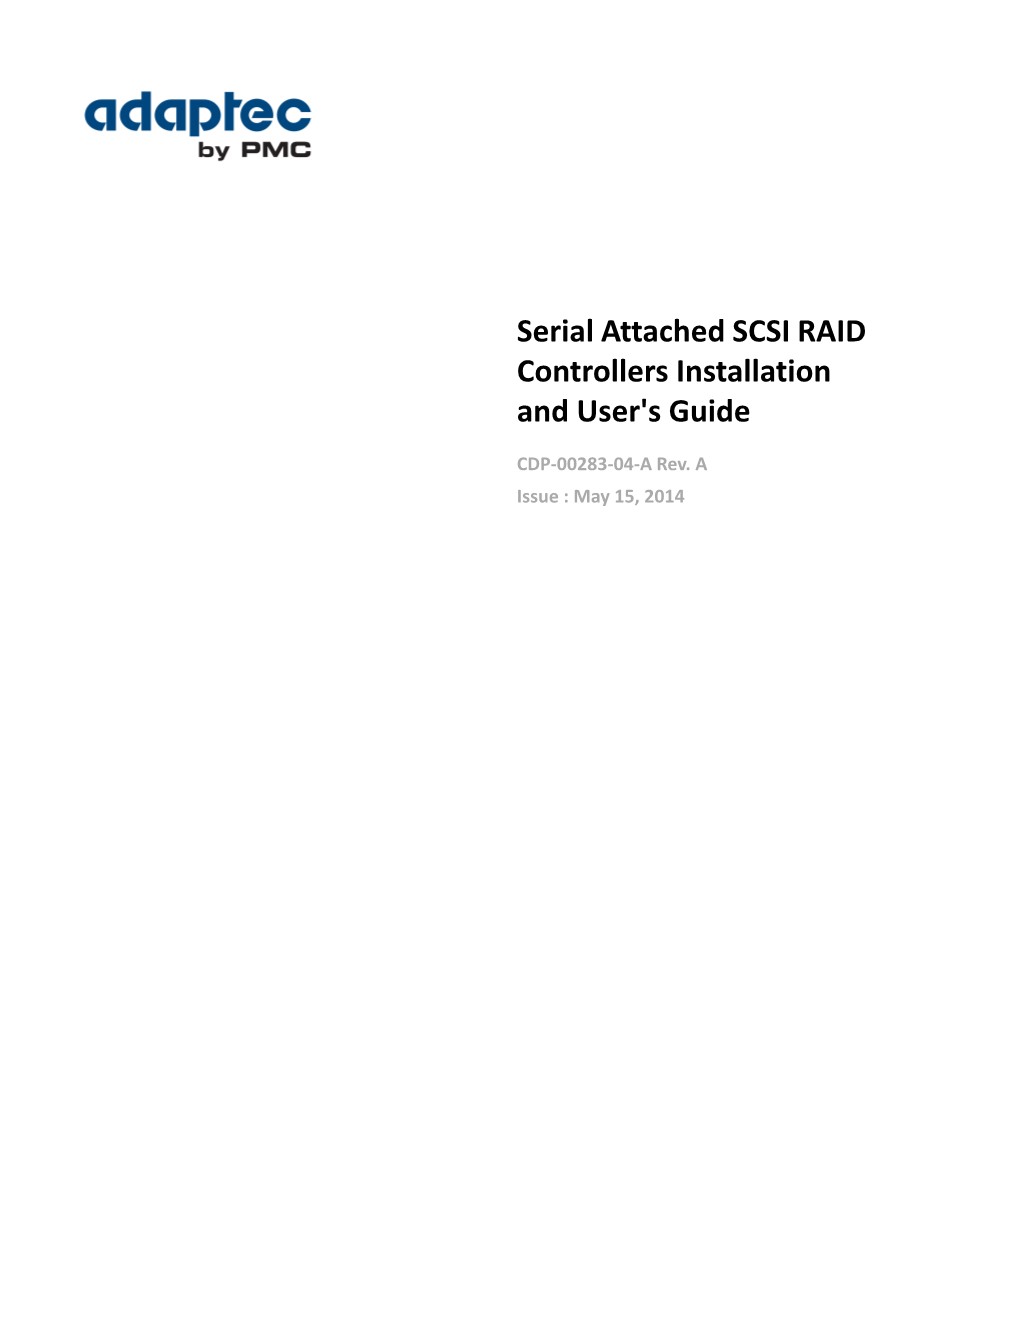 Serial Attached SCSI RAID Controllers Installation and User's Guide